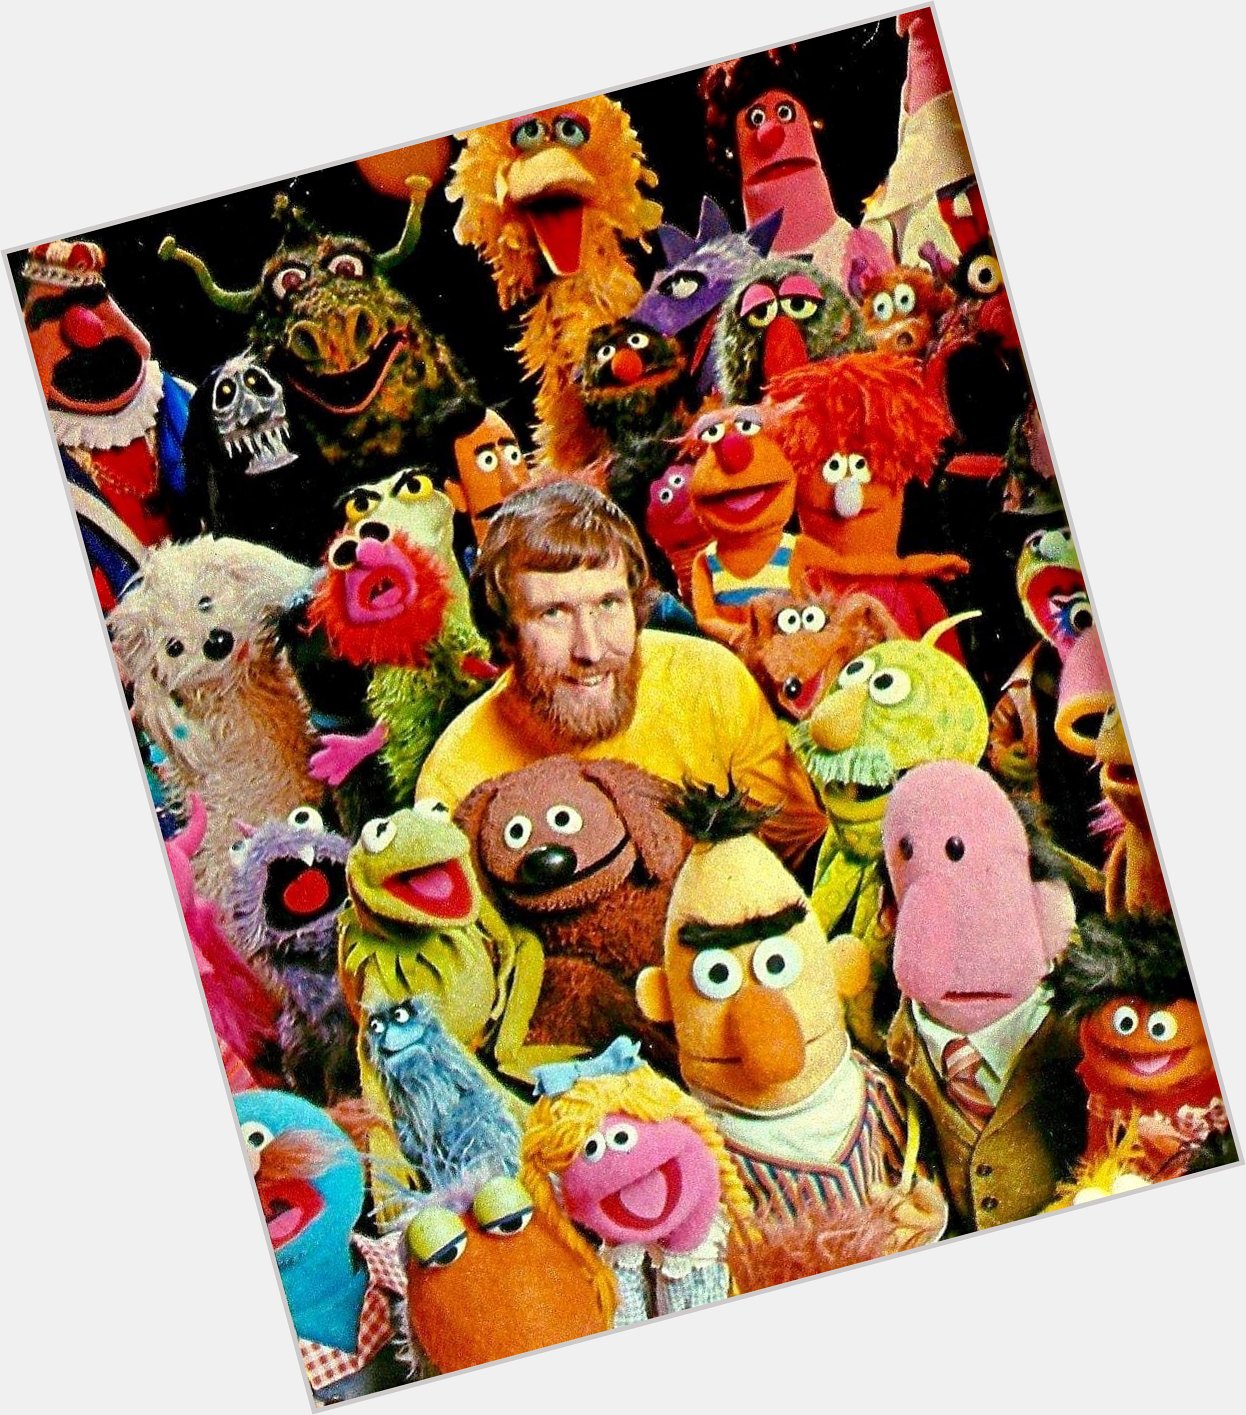 Happy birthday Jim Henson. From the lovers, the dreamers and me. 